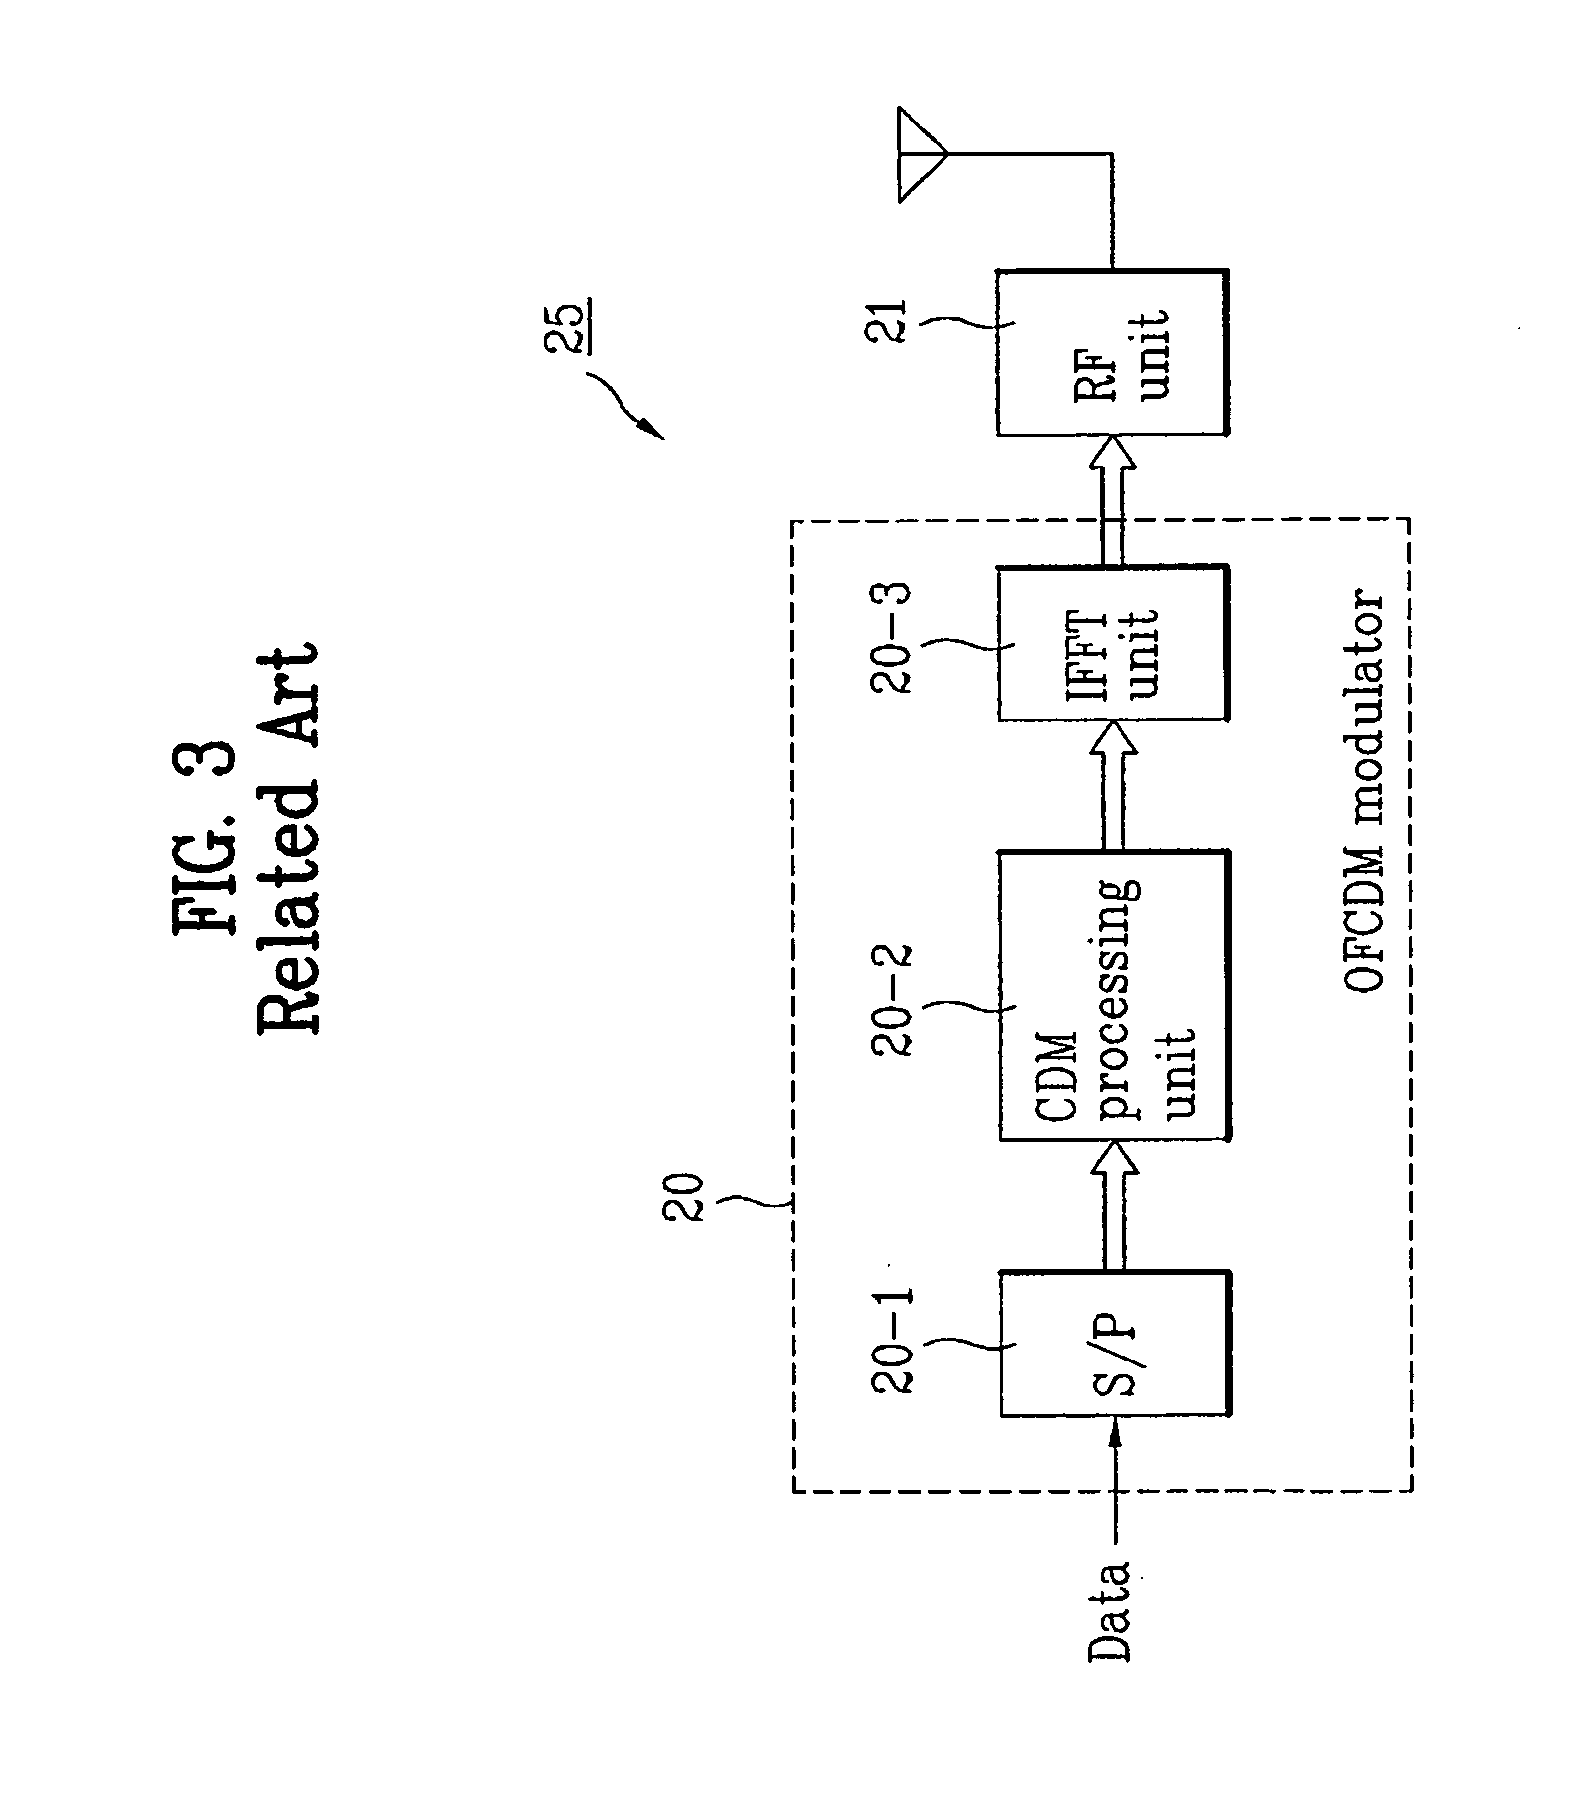 Wireless multiple access system for suppressing inter-cell interference